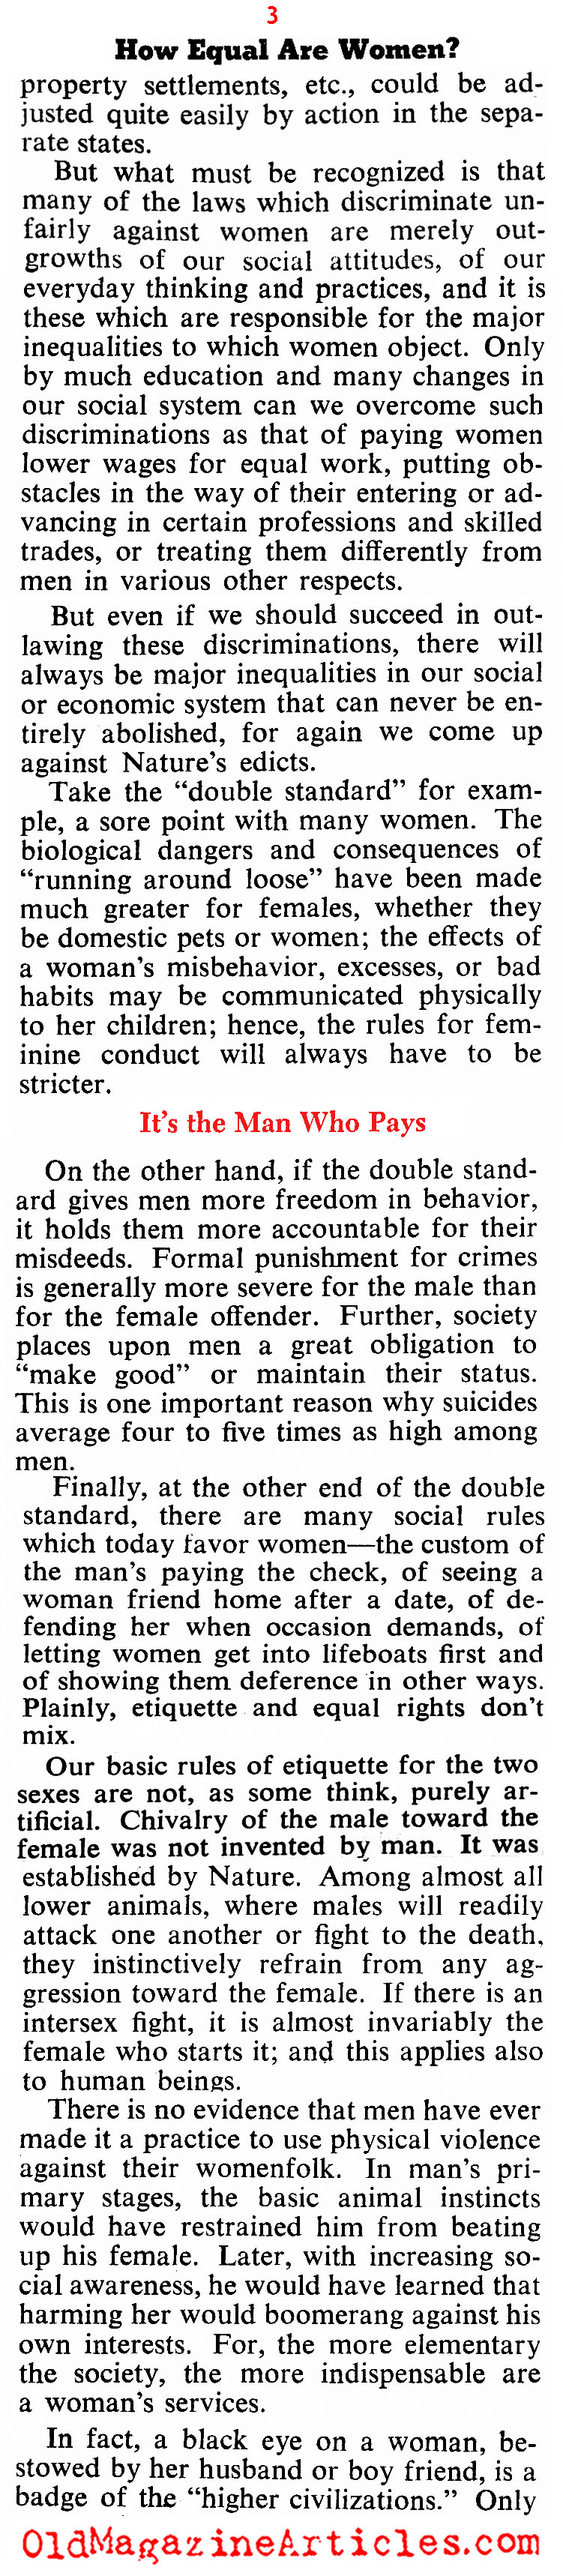 Home Front Feminism (Collier's Magazine, 1943)